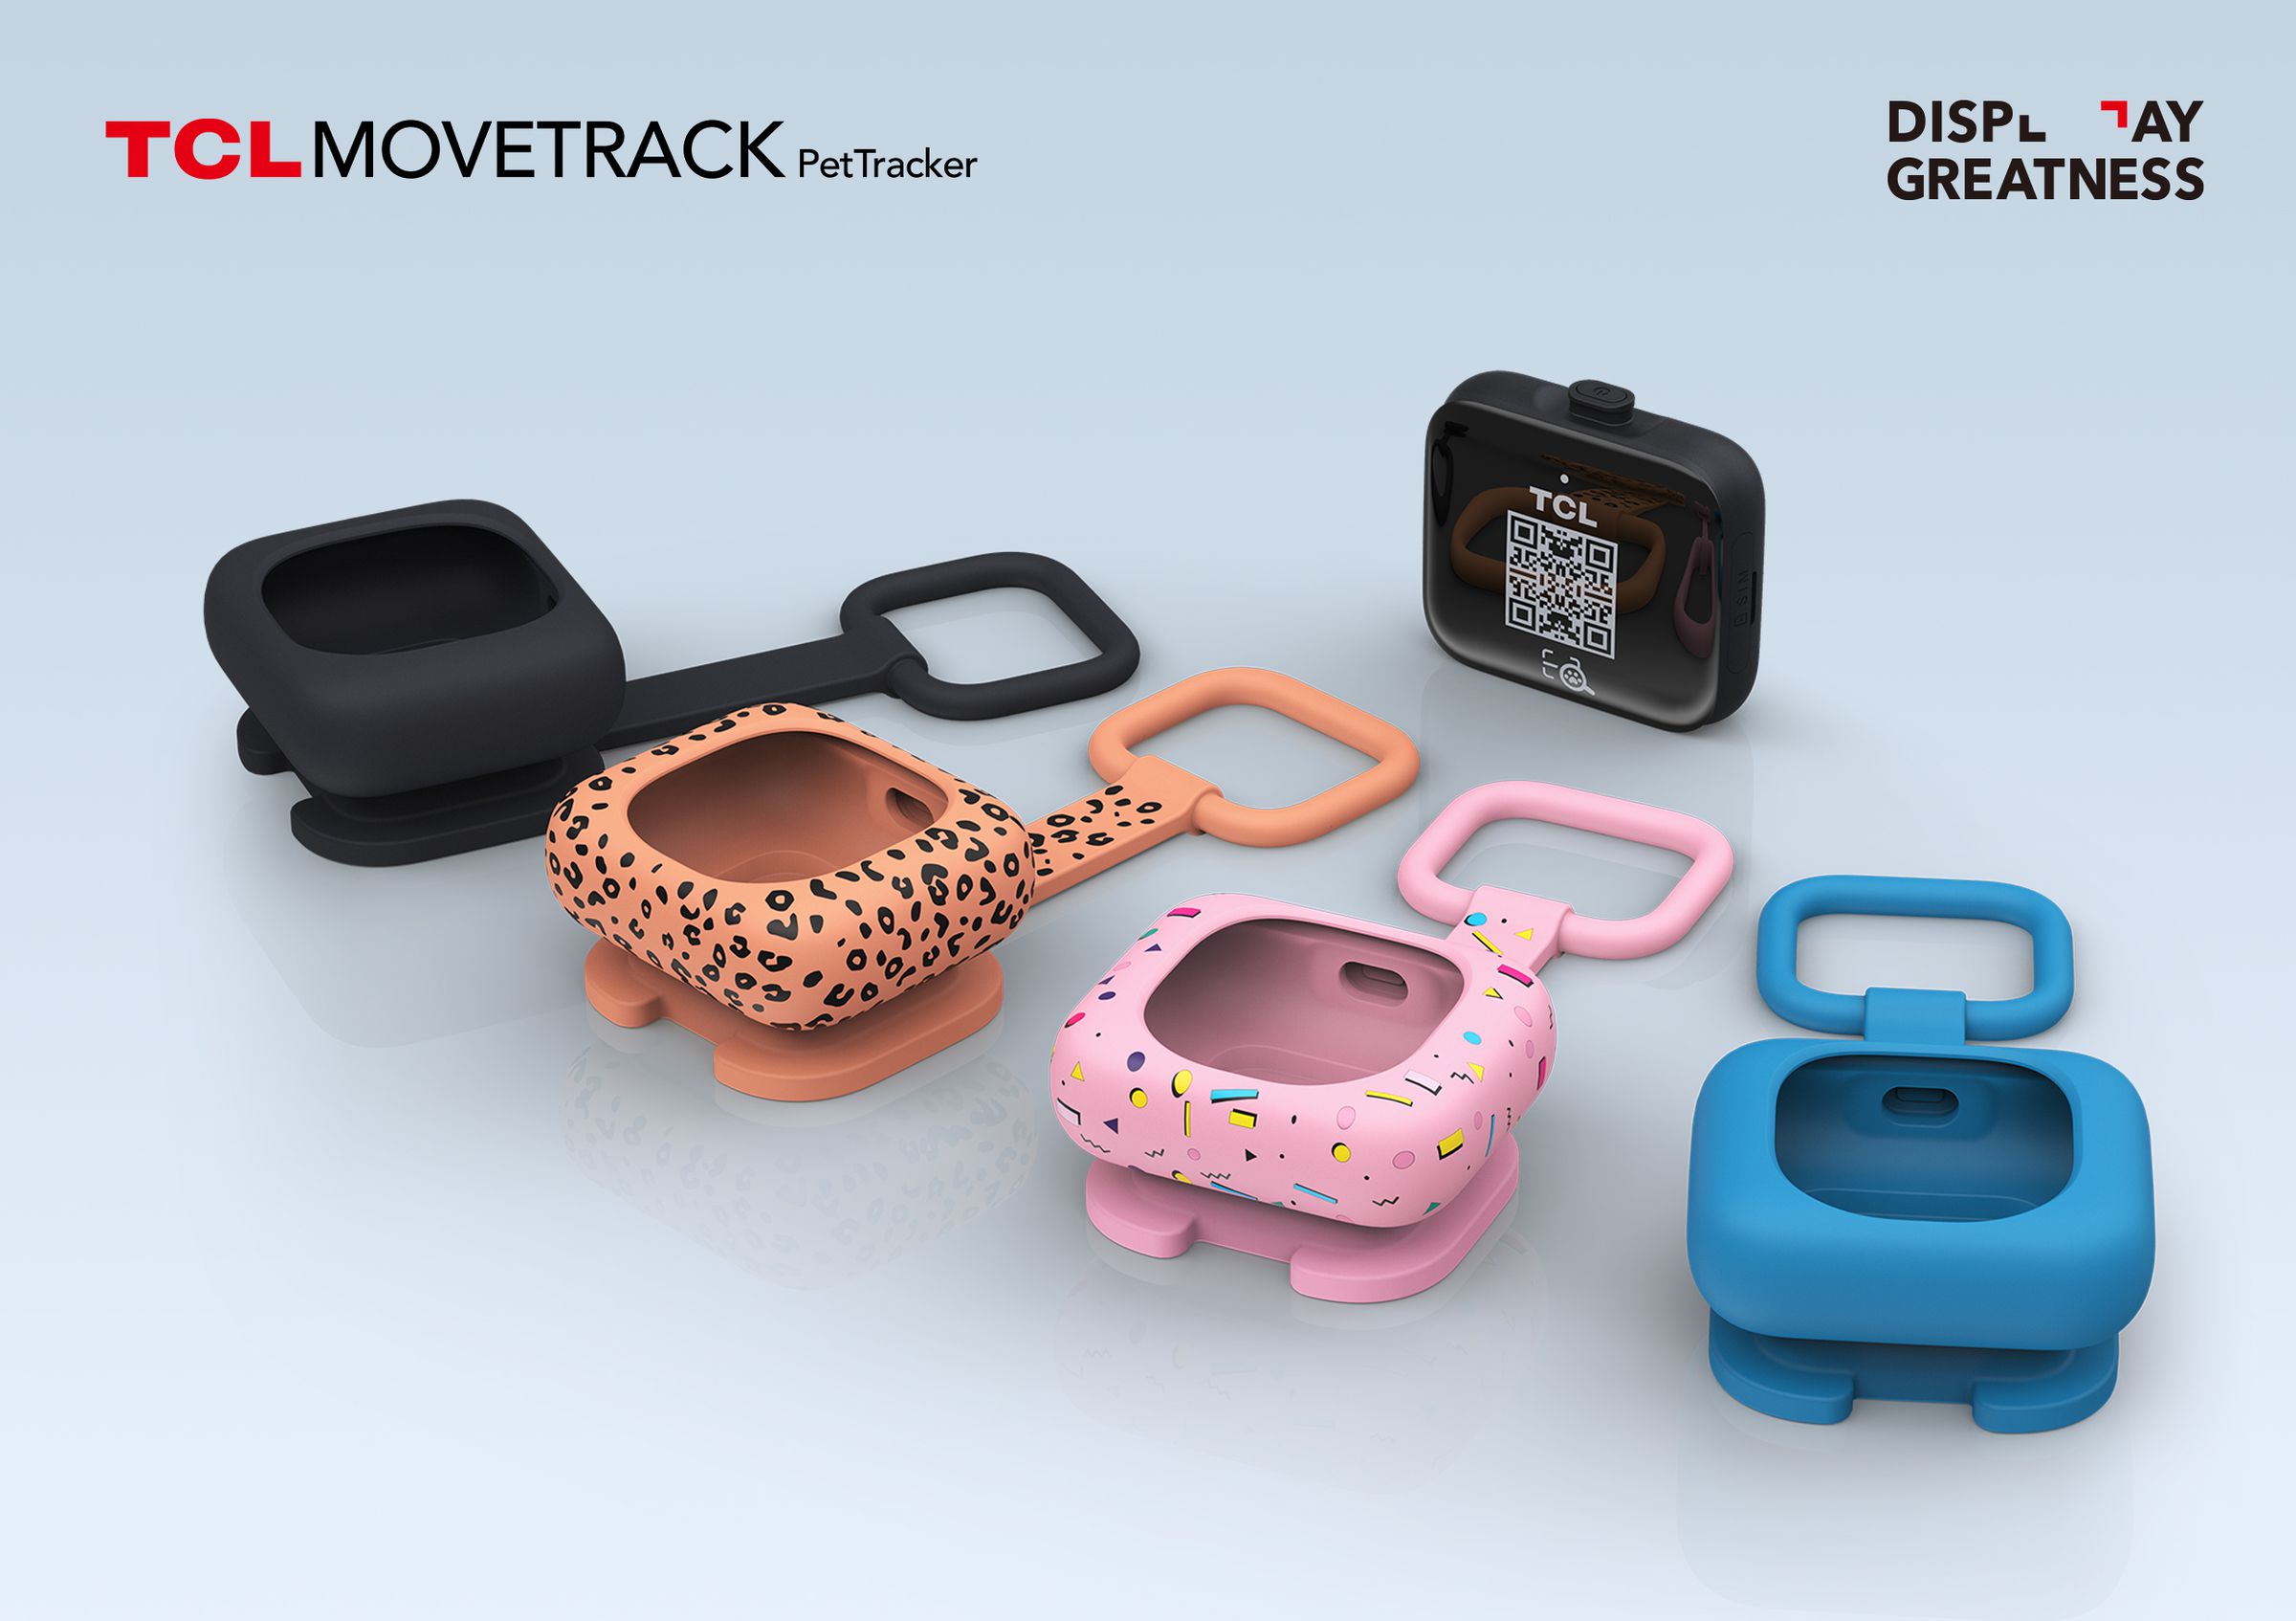 MoveTrack Pet Tracker keeps tabs on your pet.